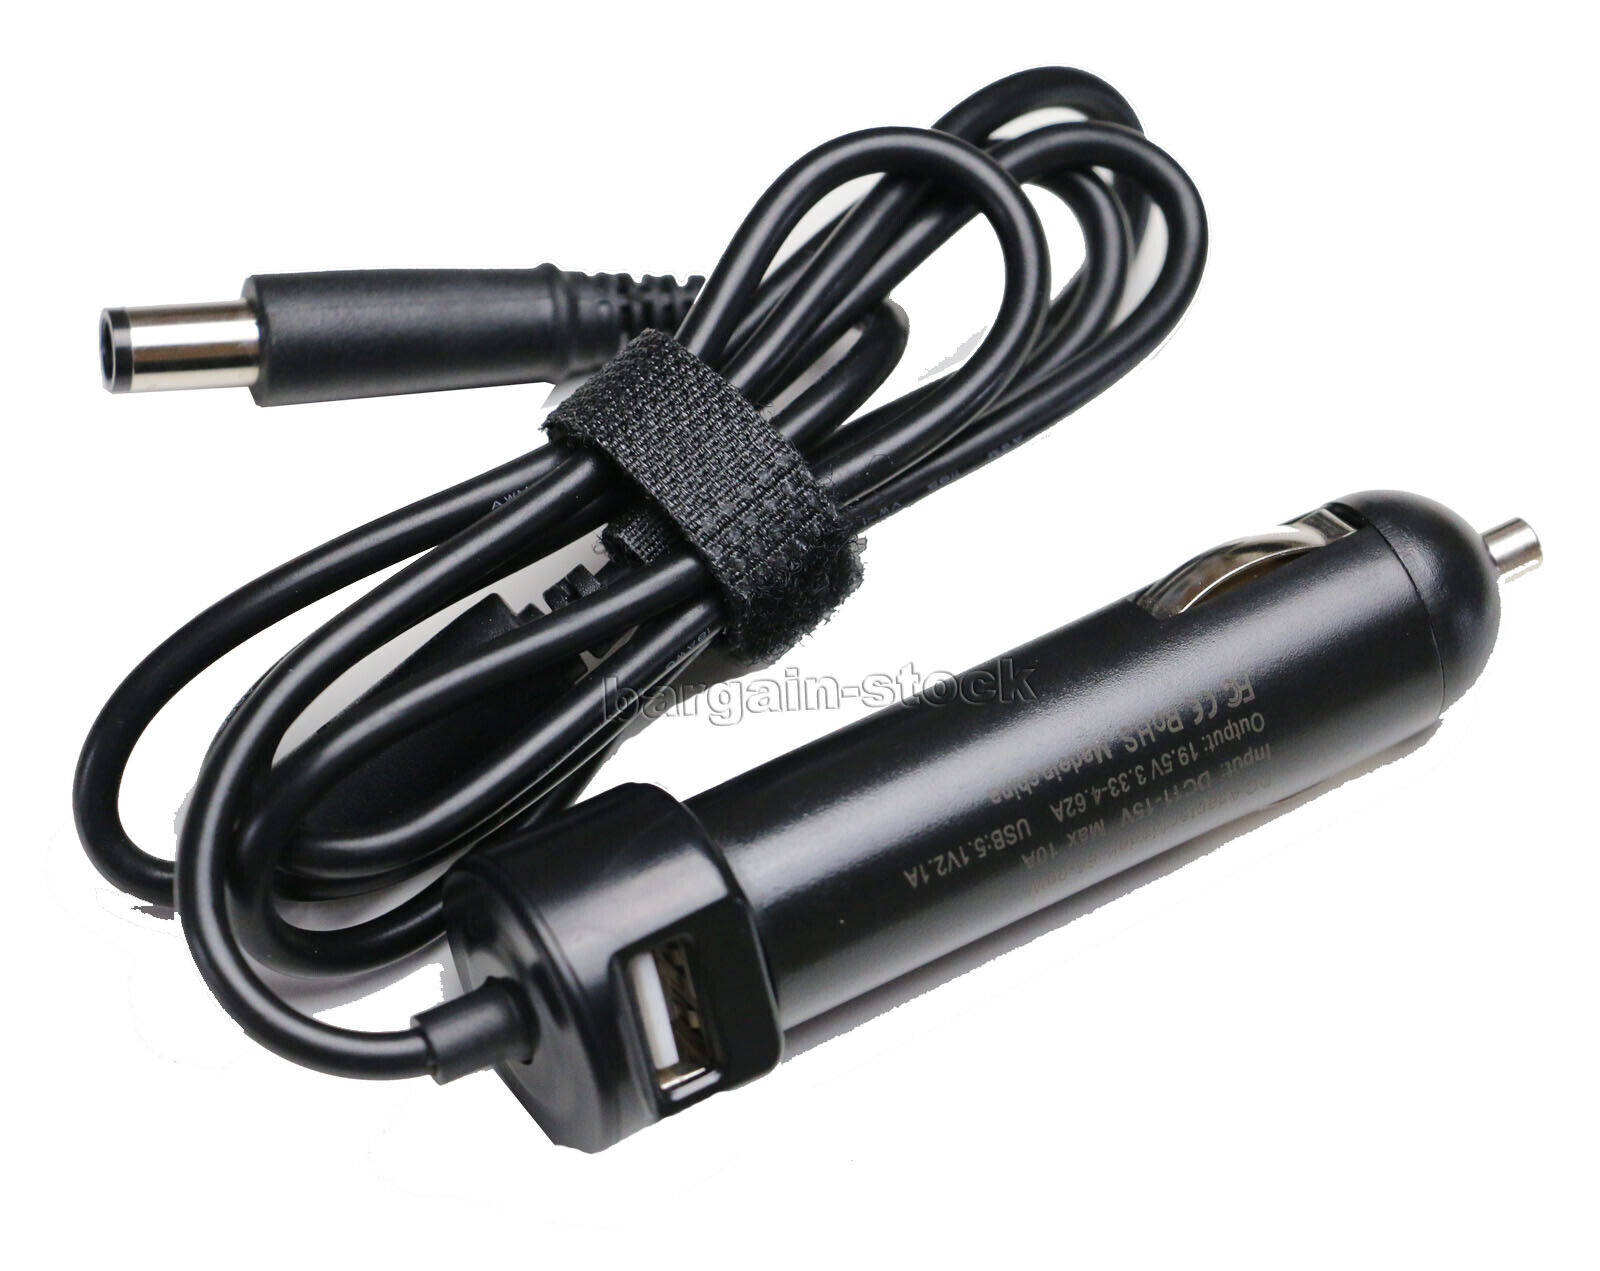 AUTO Car Charger Power Adapter For HP Probook 455-G1 455-G2 640-G1 645-G1 650-G1